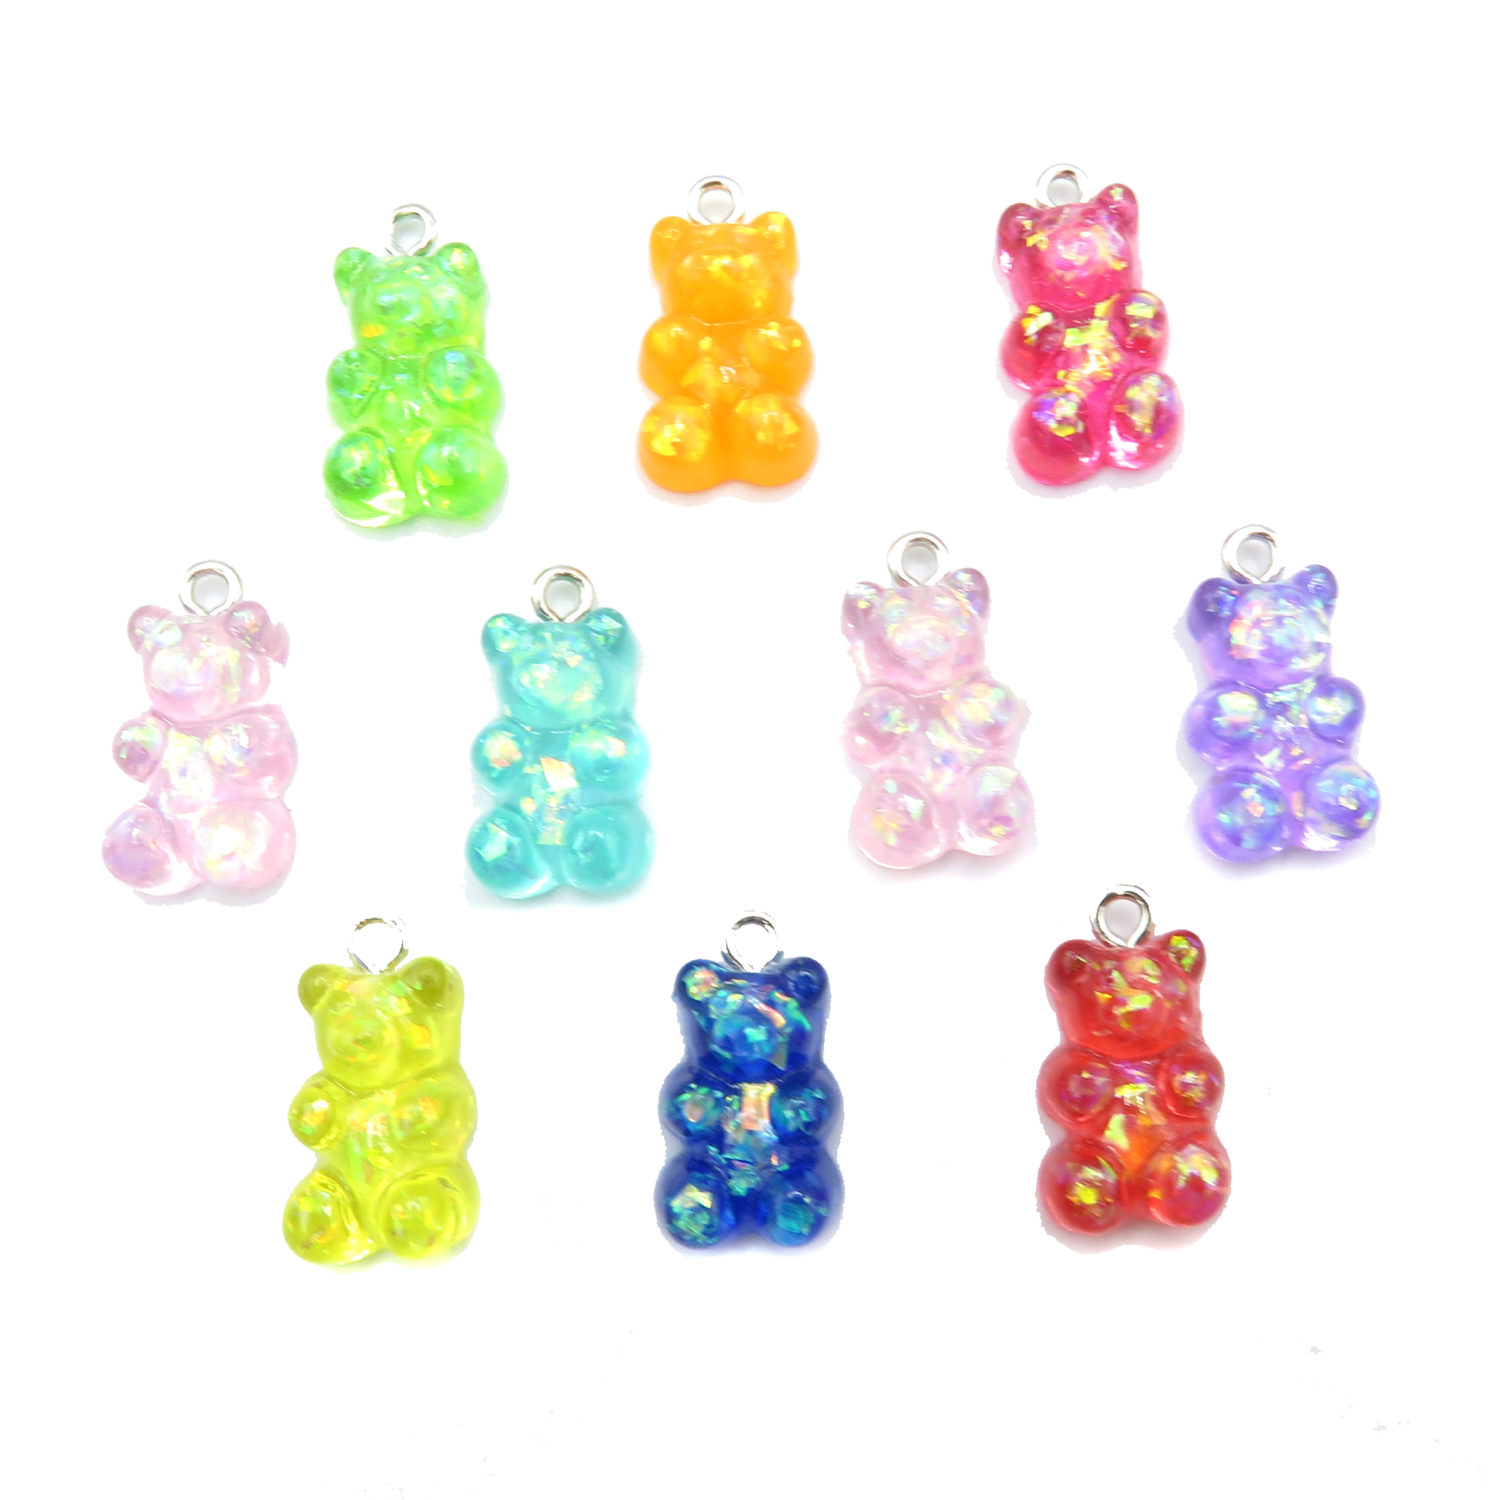 Colorful Lot of Resin Gummy Bear Charms with A Holographic Finish